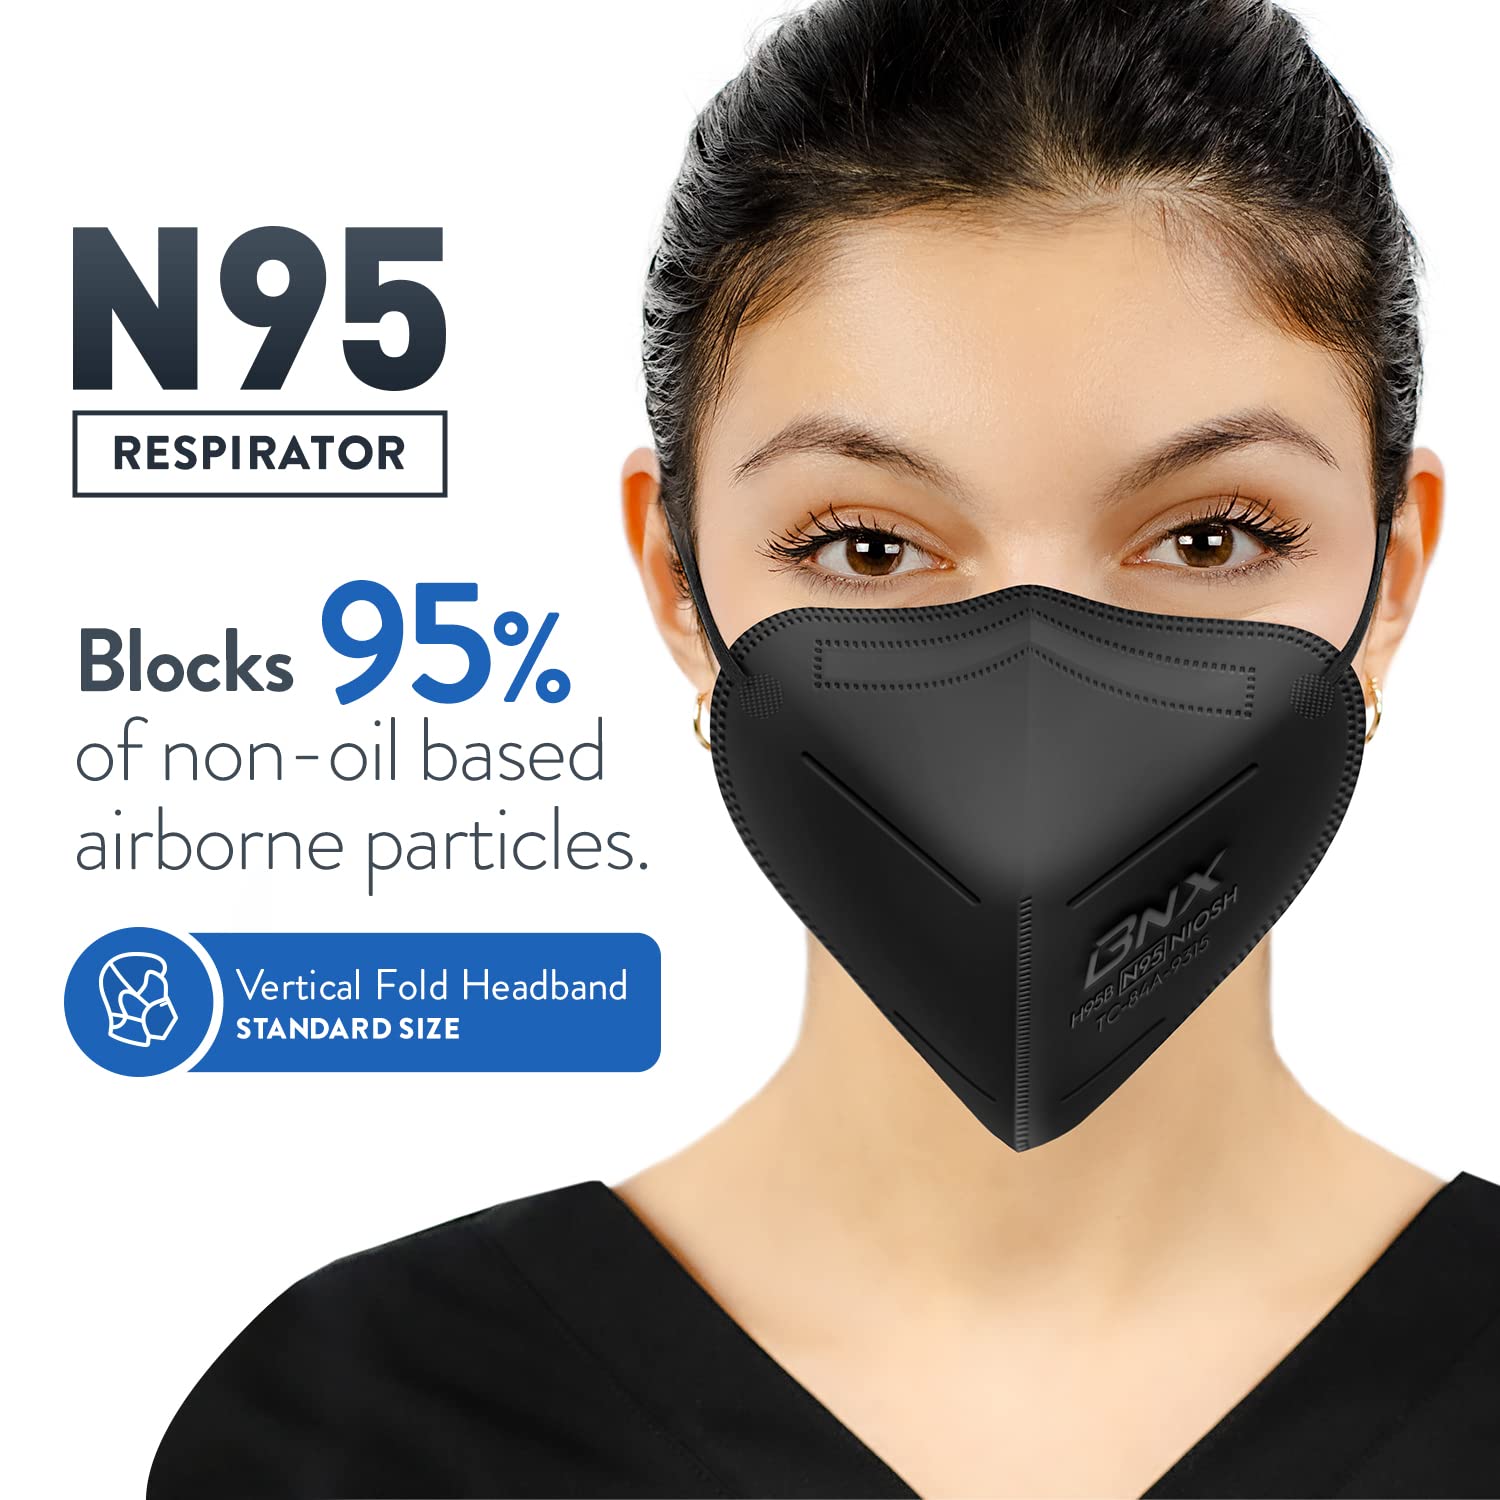 AccuMed BNX N95 Mask Black MADE IN USA Particulate Respirator Protective Face Mask (10-Pack, Approval Number TC-84A-9315 / Model H95B)